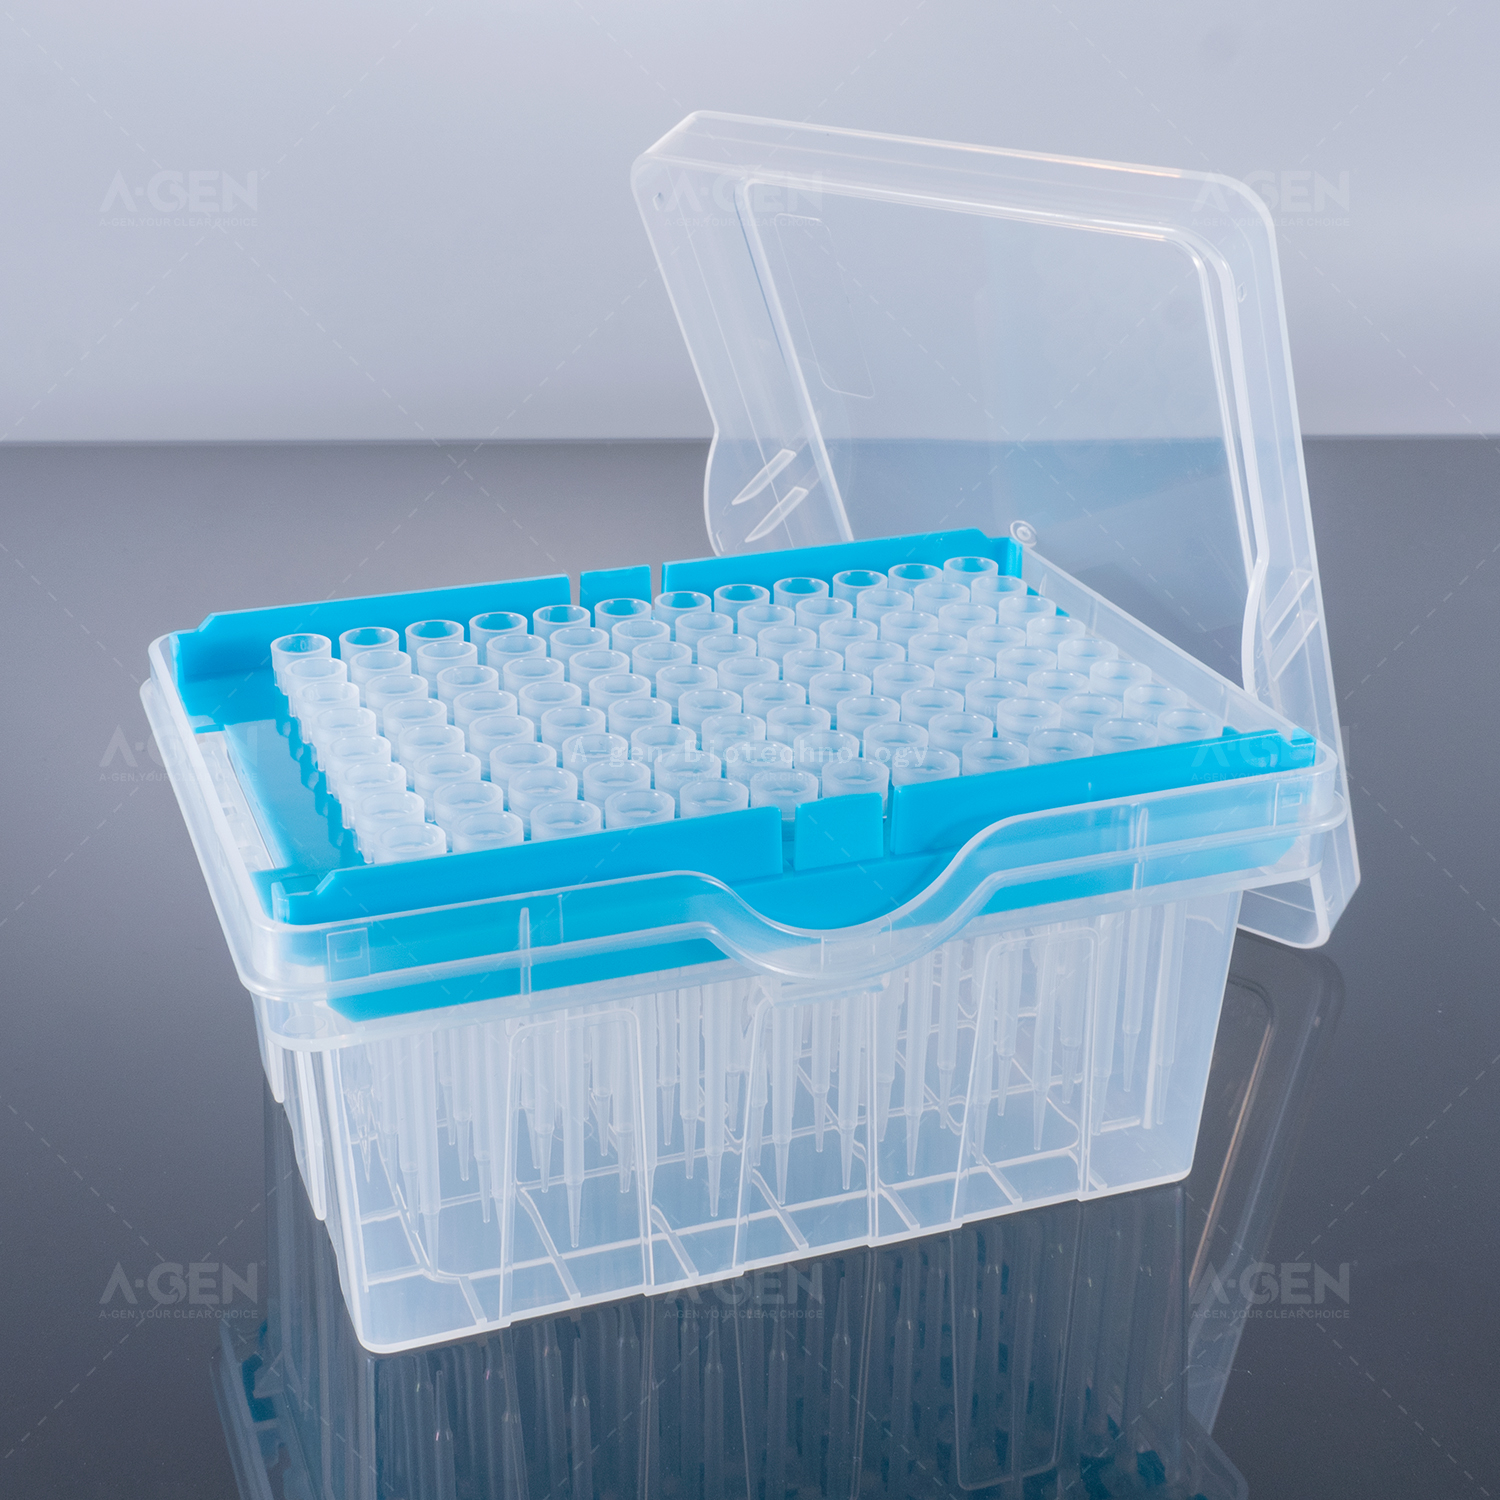 Tecan LiHa 50μL Transparent PP Pipette Tip (Racked,sterilized) for Liquid Transfer with Filter TTF-50-RSL Low Retention